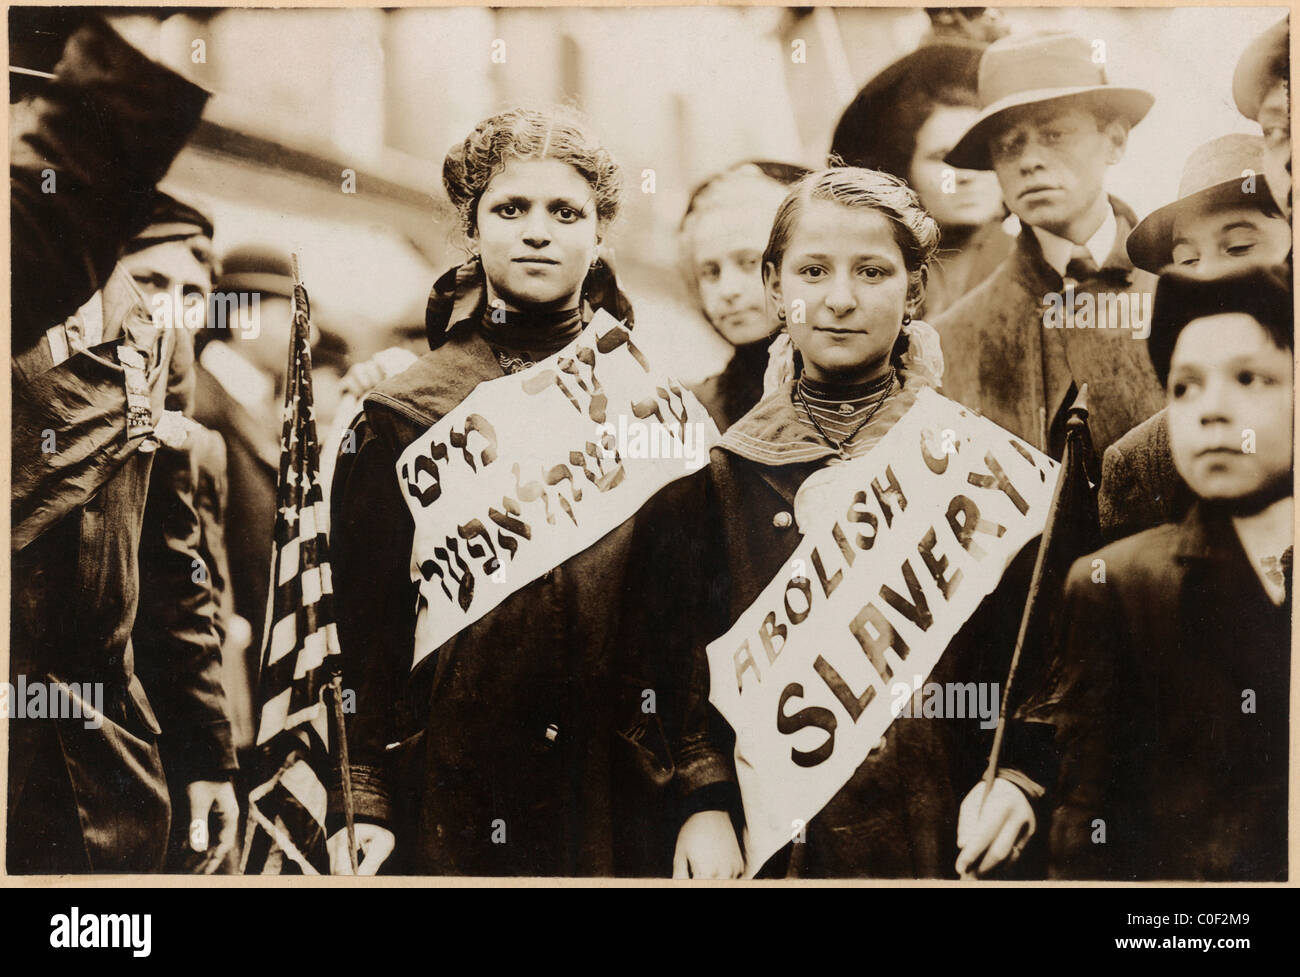 Protest against child labor 'ABOLISH CHILD SLAVERY!!' in English and Yiddish 1909 labor parade in New York City Stock Photo